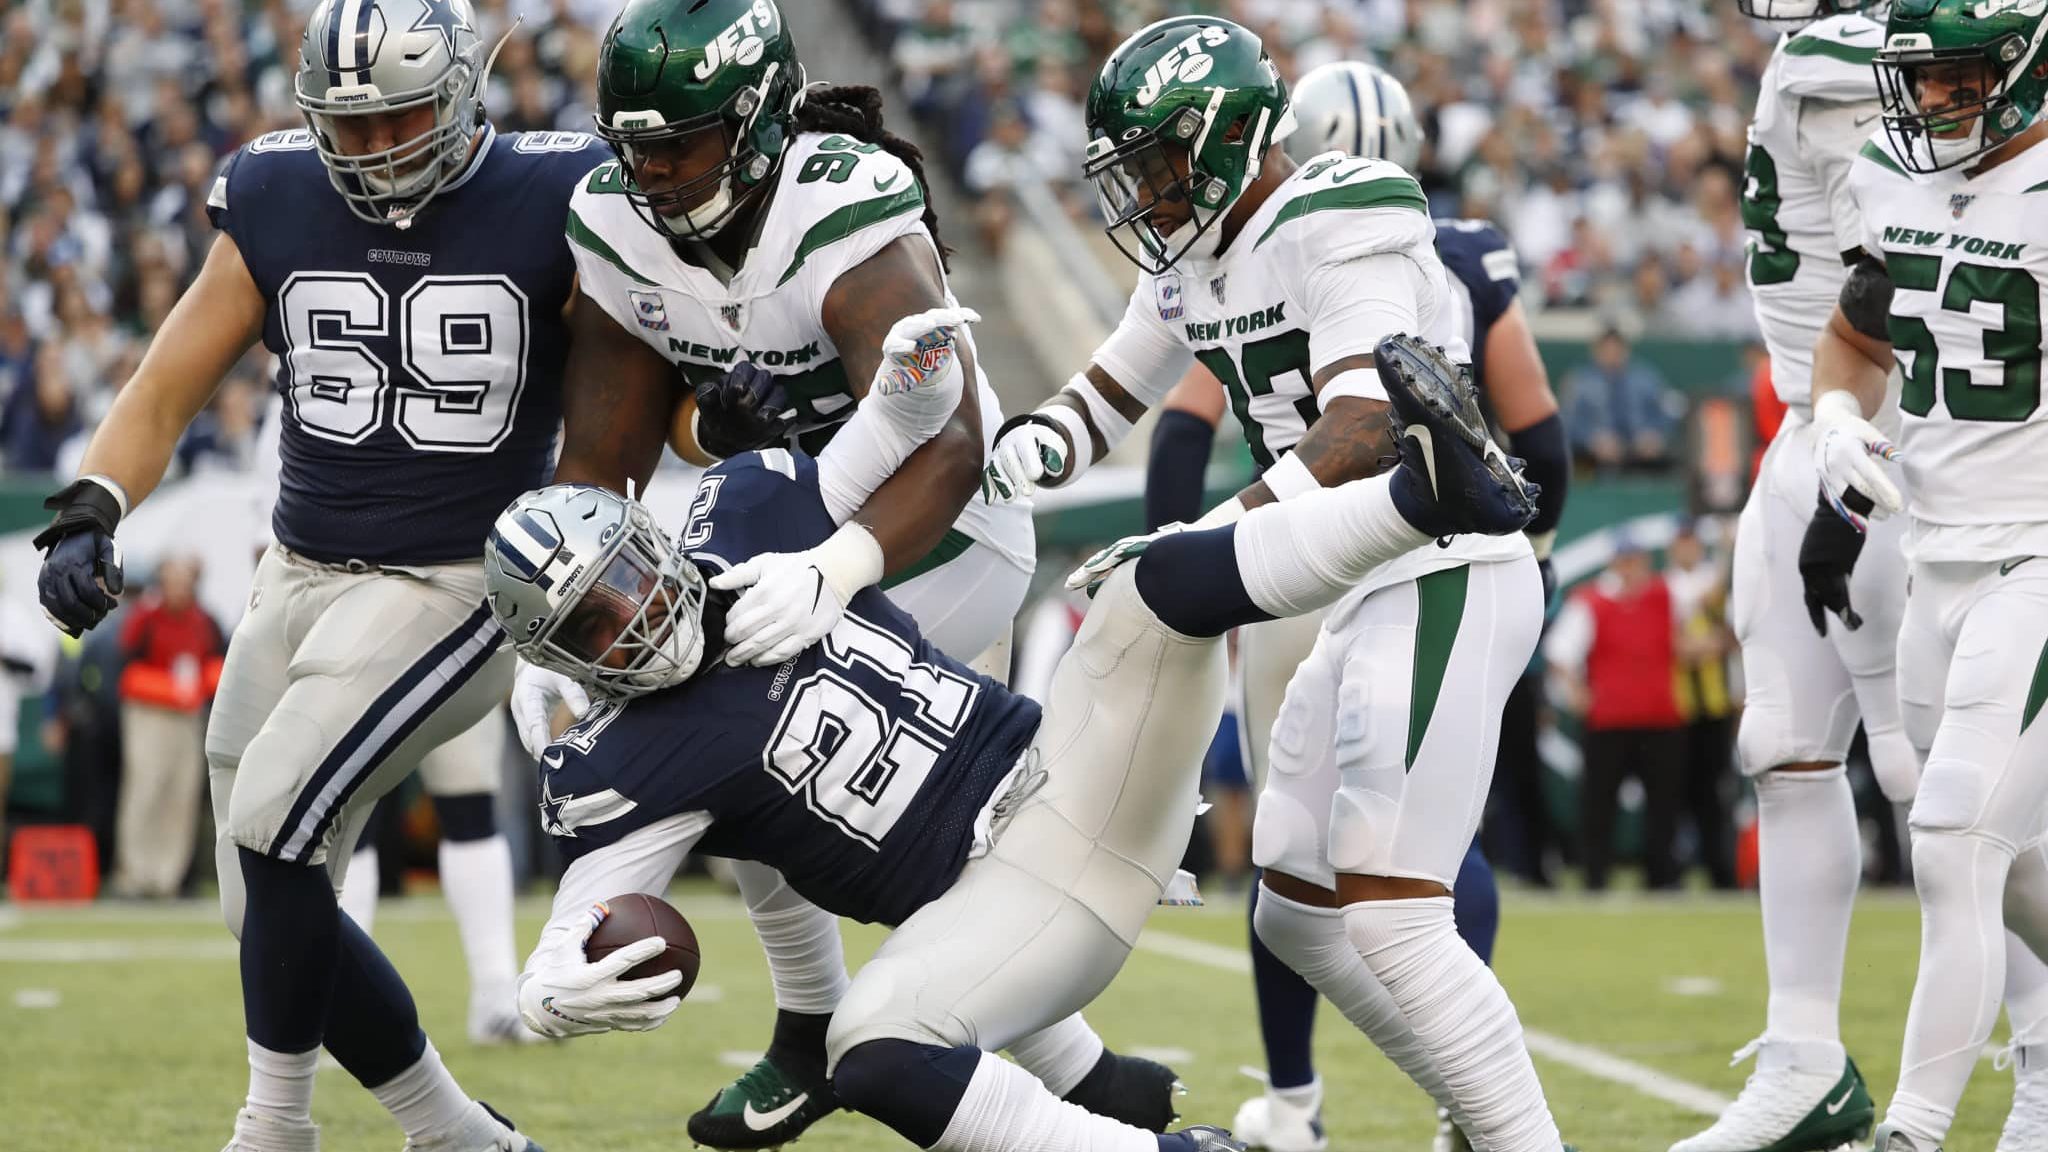 EAST RUTHERFORD, NEW JERSEY - OCTOBER 13: Ezekiel Elliott #21 of the Dallas Cowboys is brought down by Steve McLendon #99 and Jamal Adams #33 of the New York Jets during the second quarter game at MetLife Stadium on October 13, 2019 in East Rutherford, New Jersey.